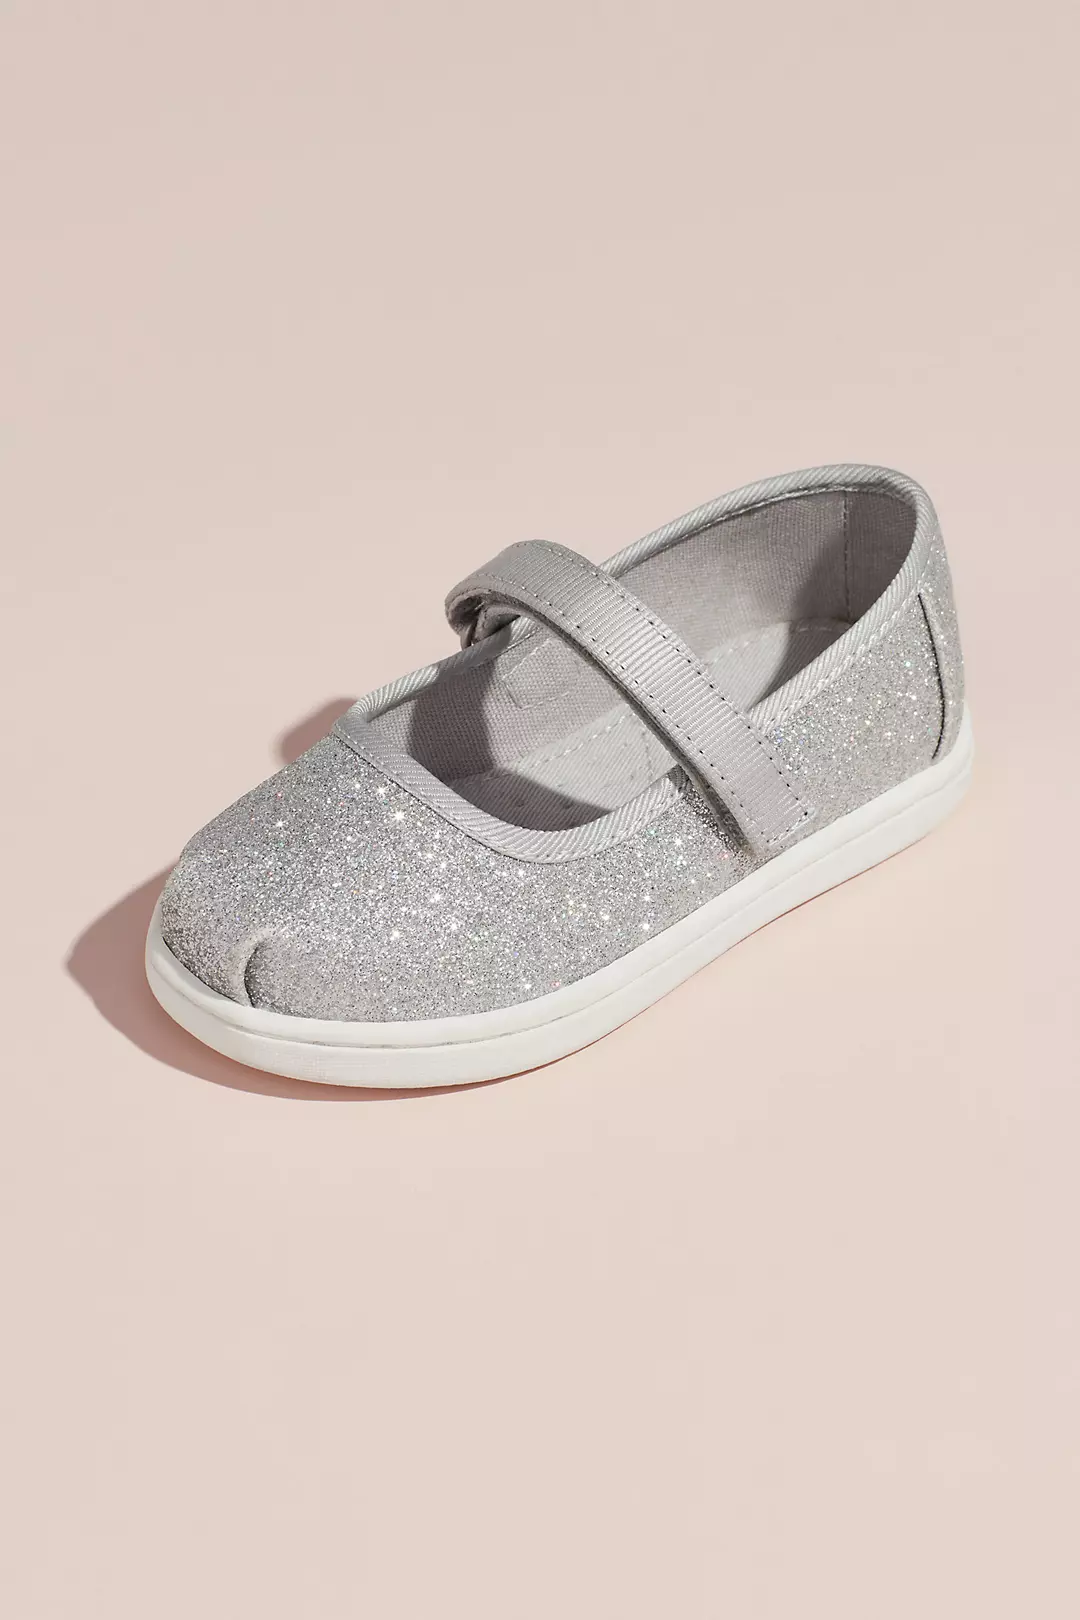 TOMS Girls Glitter Mary Janes Image